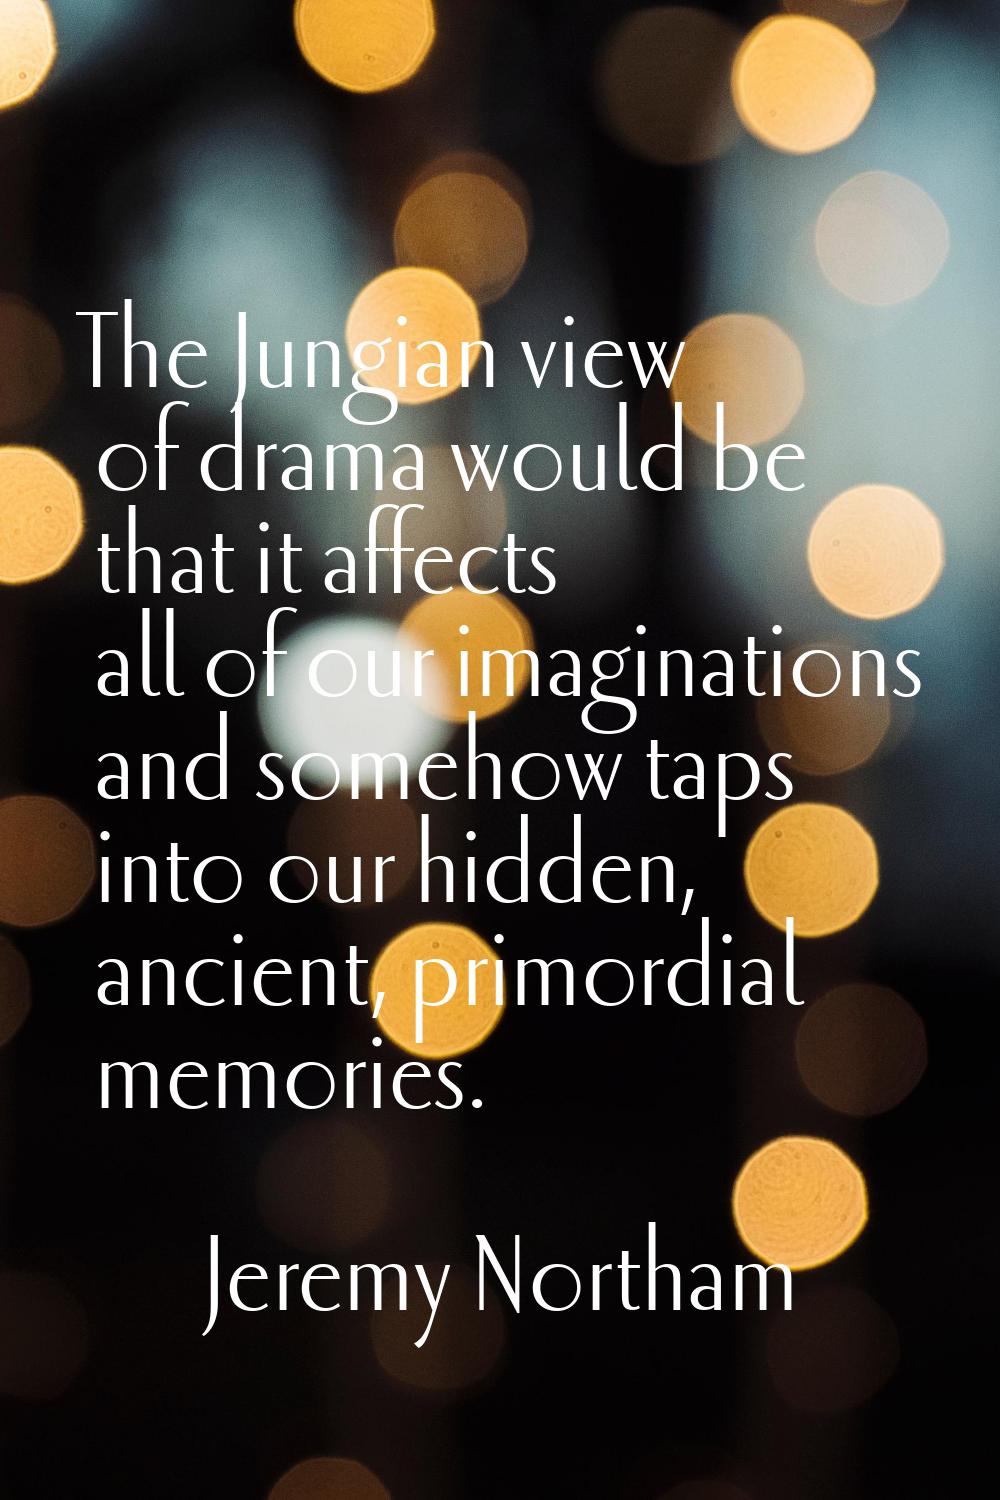 The Jungian view of drama would be that it affects all of our imaginations and somehow taps into ou